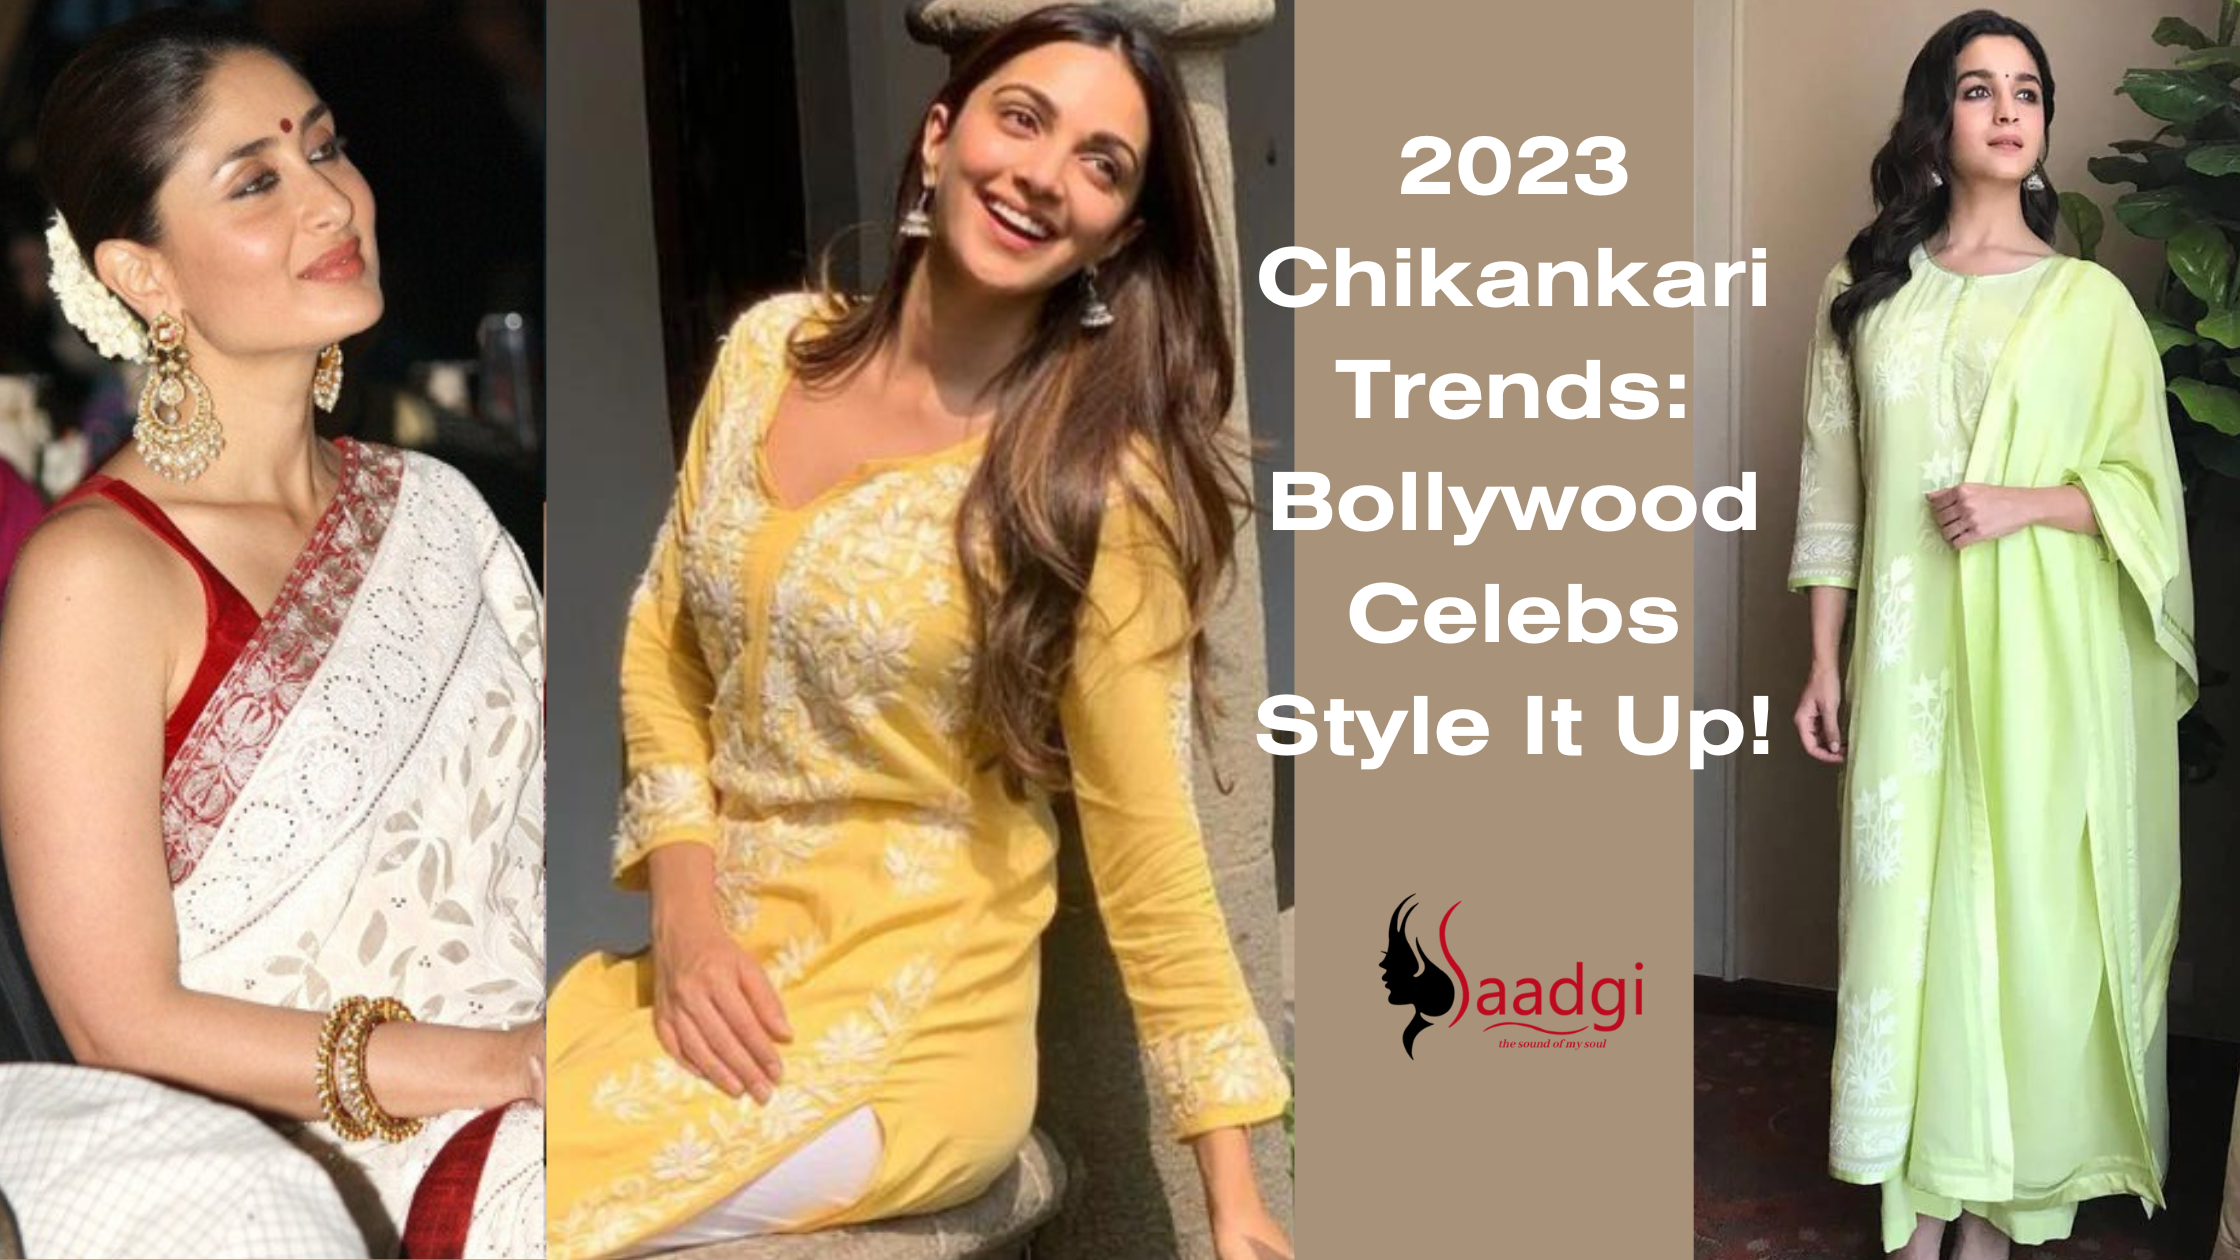 2023 Chikankari Trends: Bollywood Celebs Style It Up!